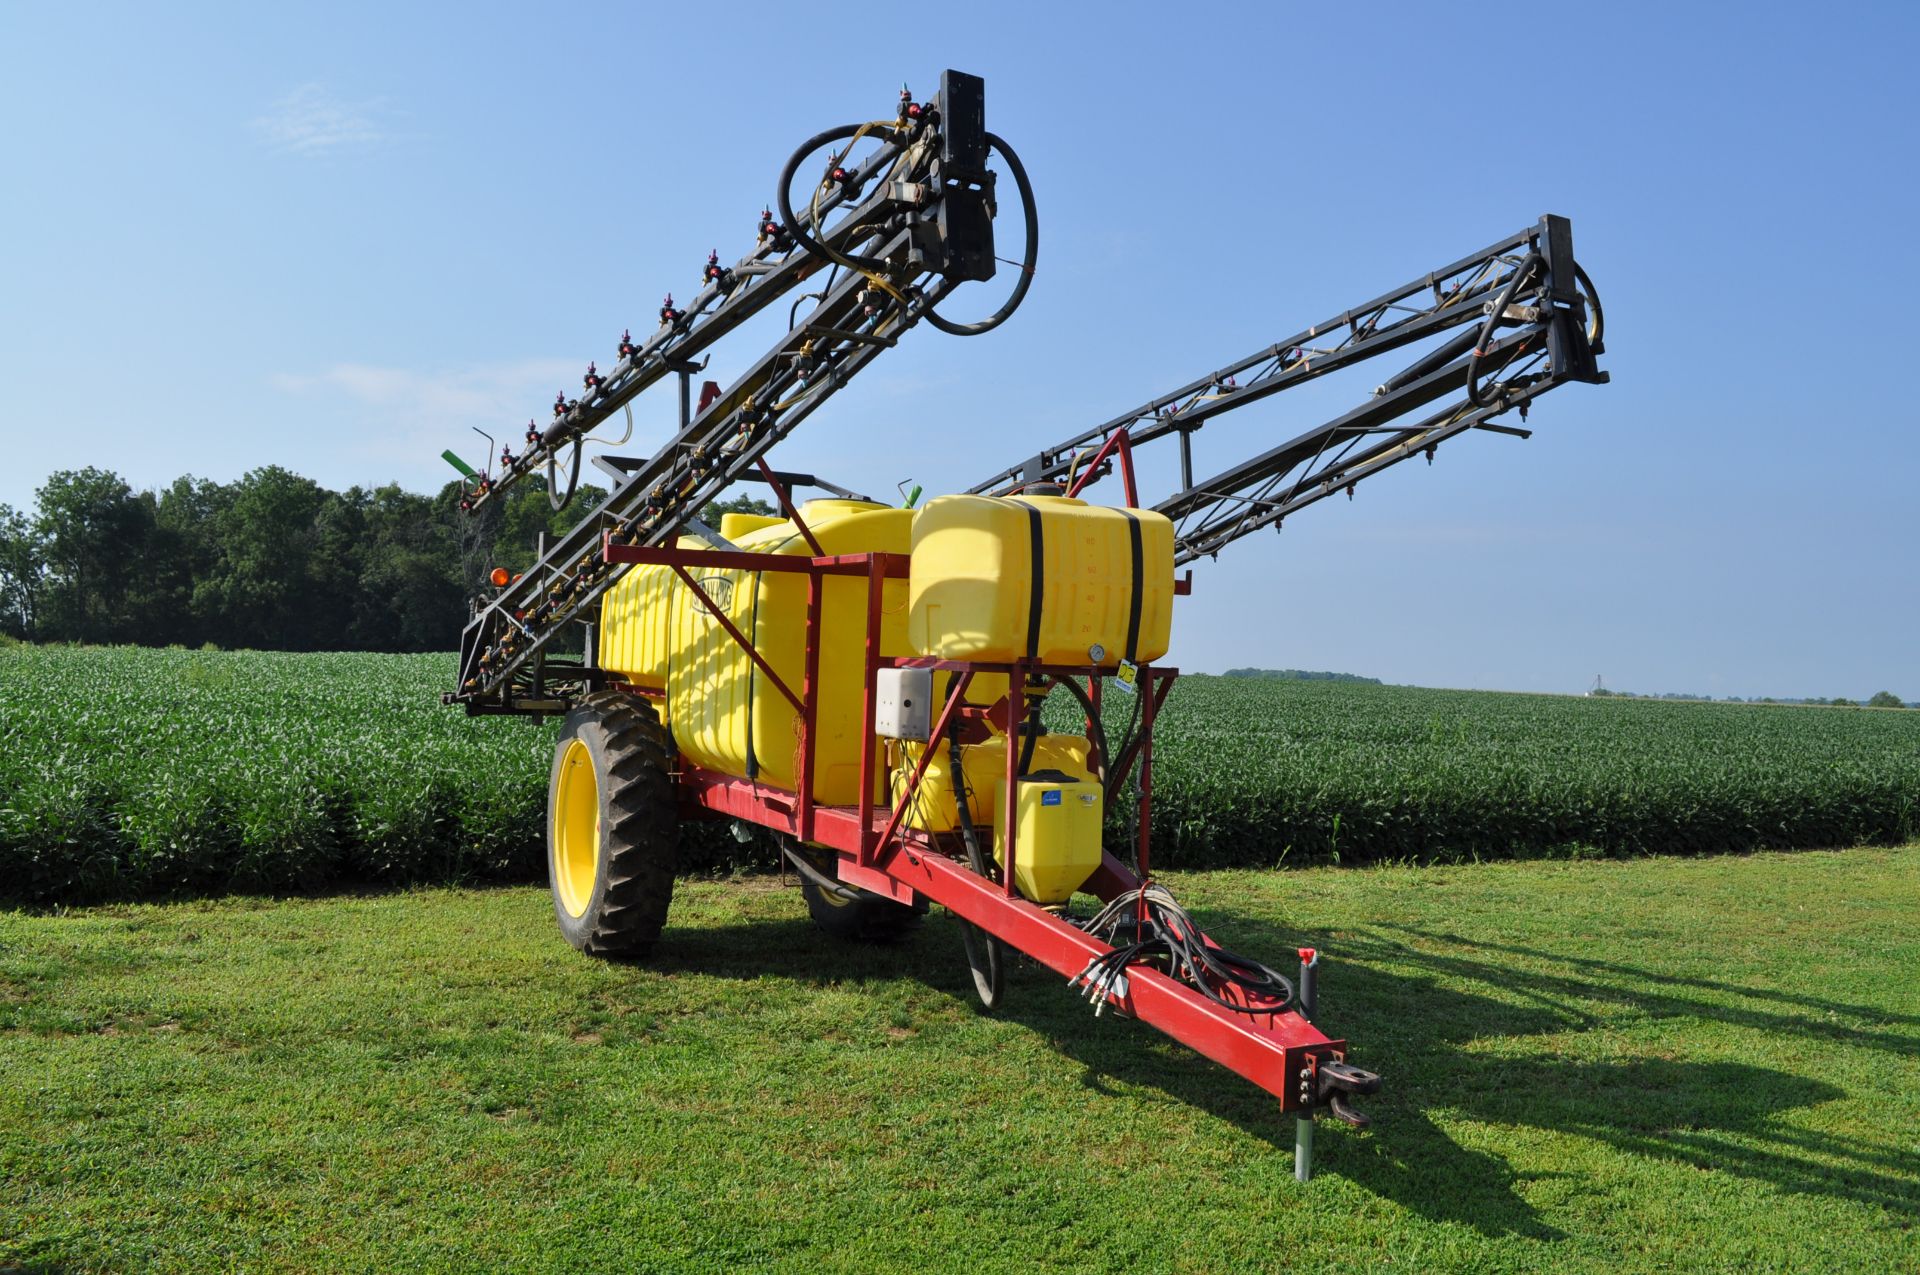 90’ Spray King pull type sprayer, 20” spacing, 3 way T-Jet wet boom bodies, 5 electric sections